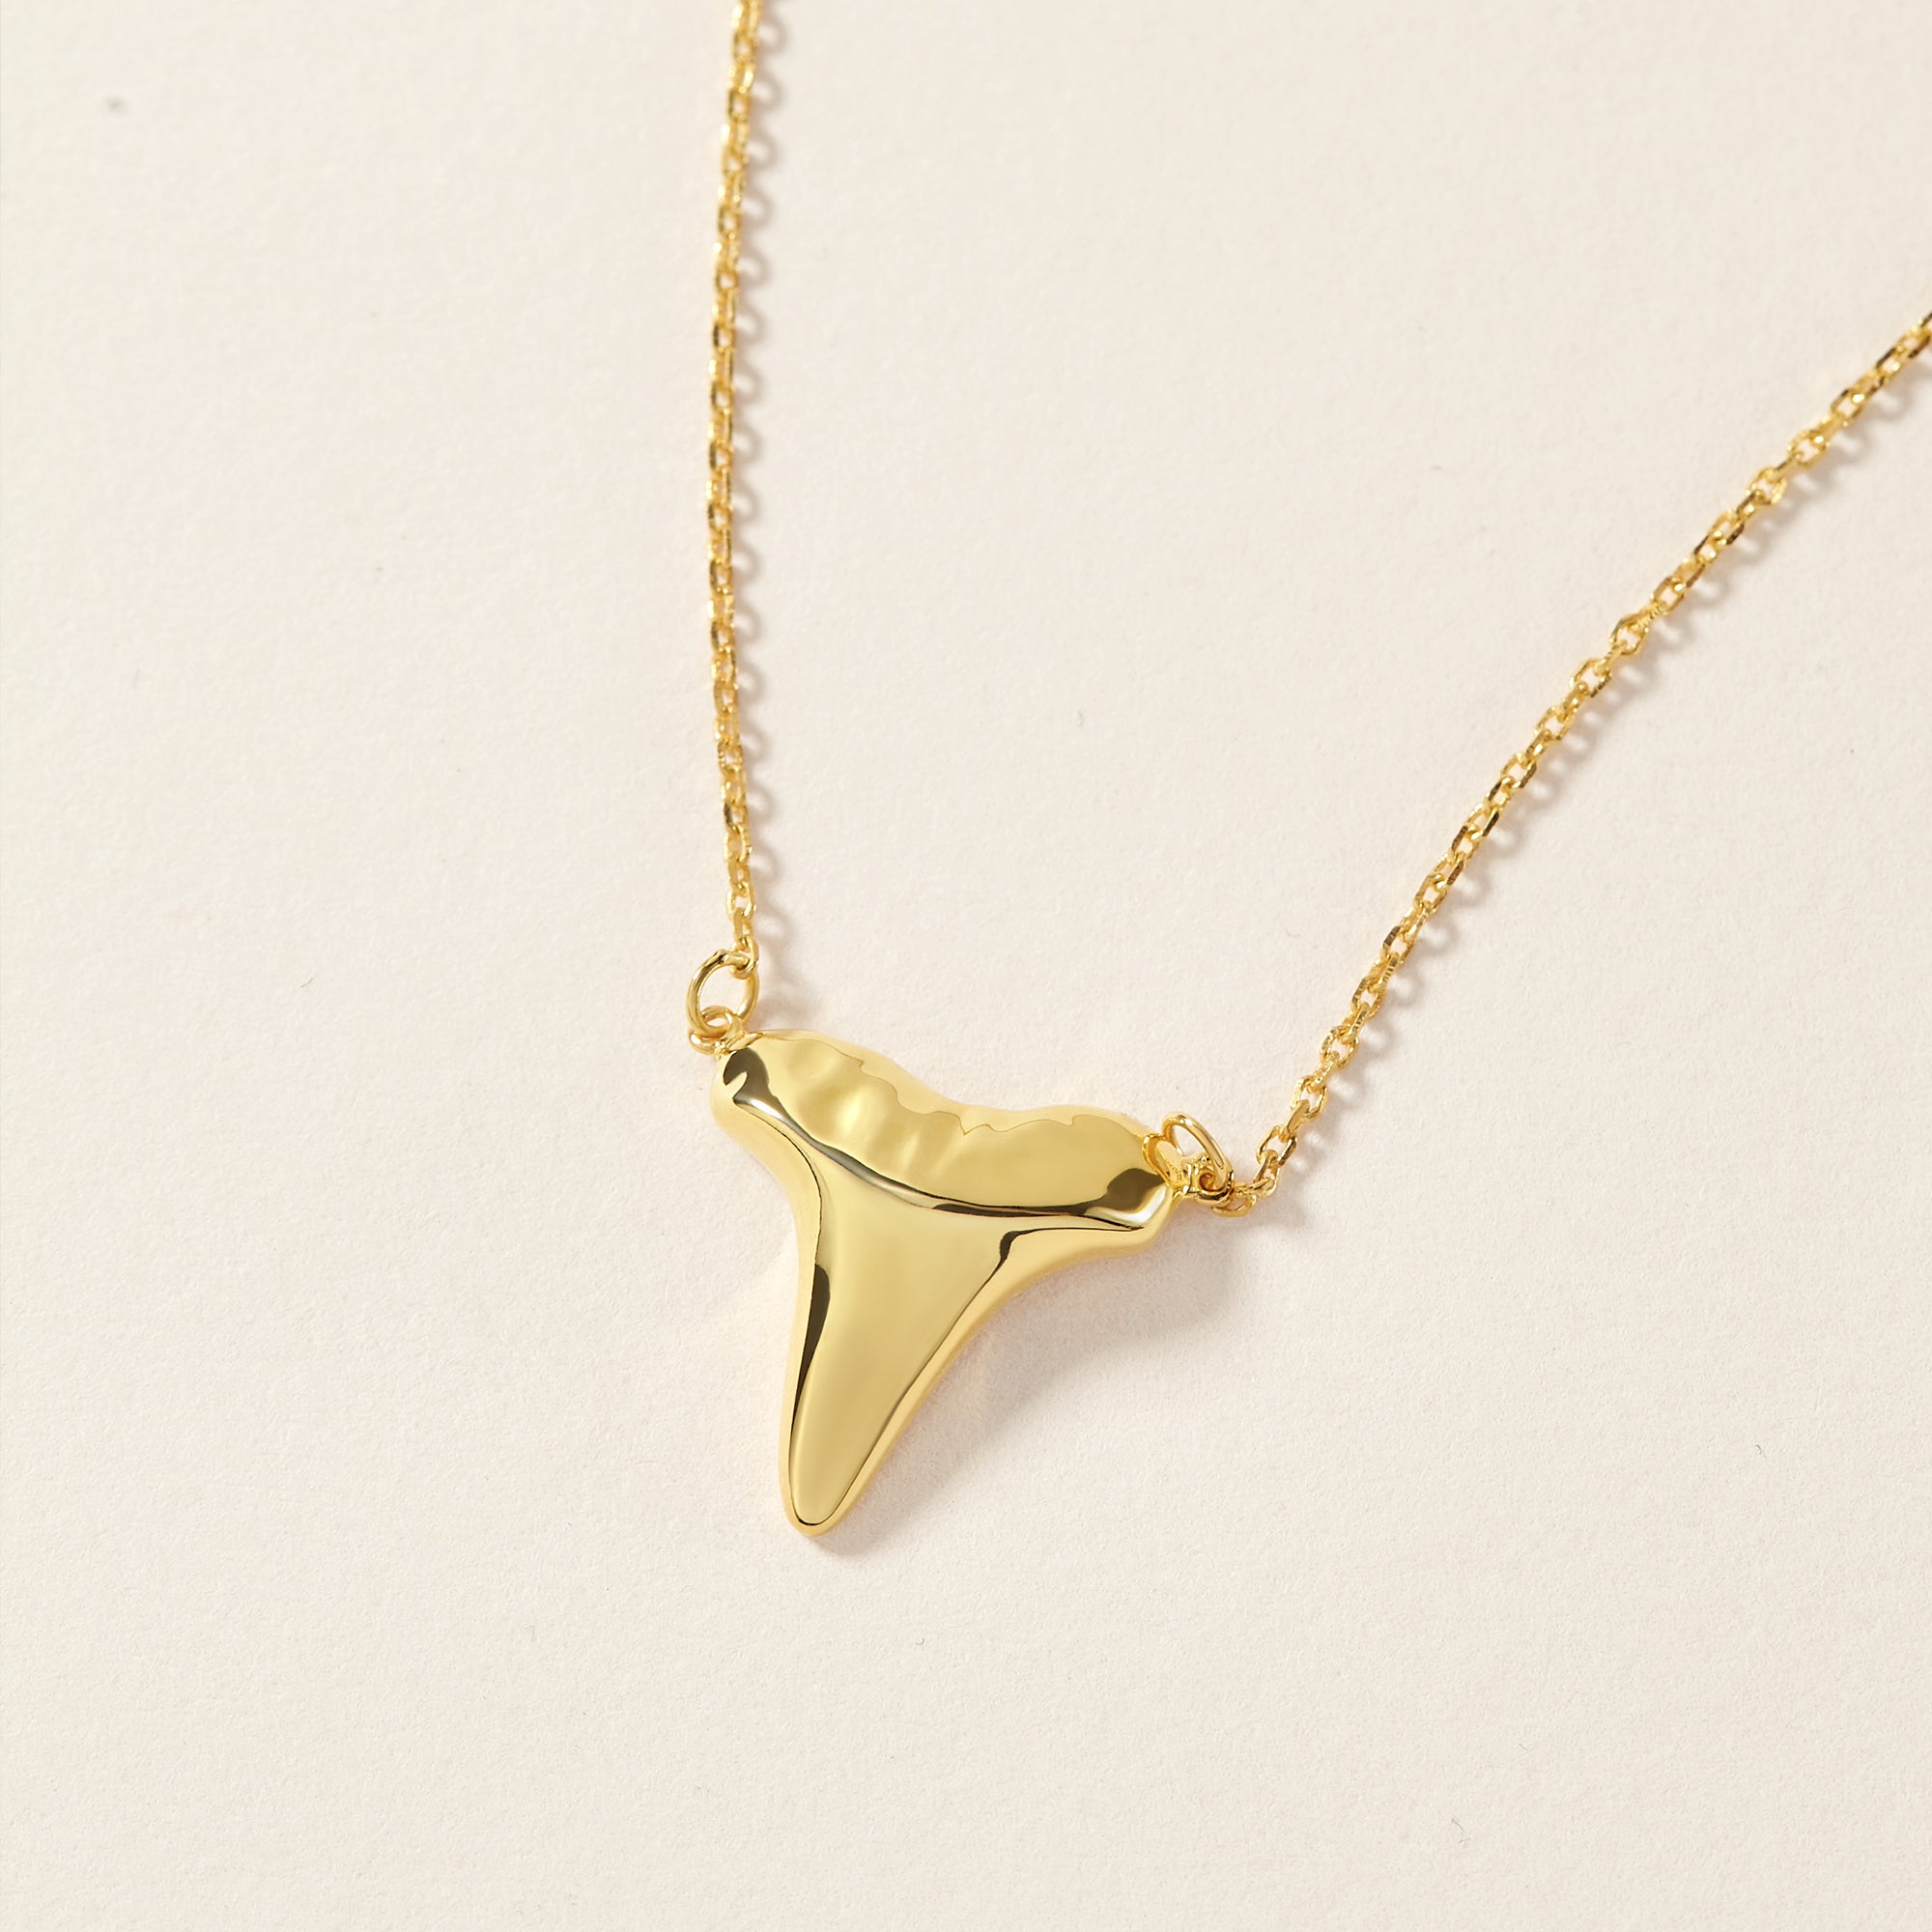 "Gold Plated Shark Tooth Tusk Charm Necklace - 925 Sterling Silver, 18" Chain" Bijou Her